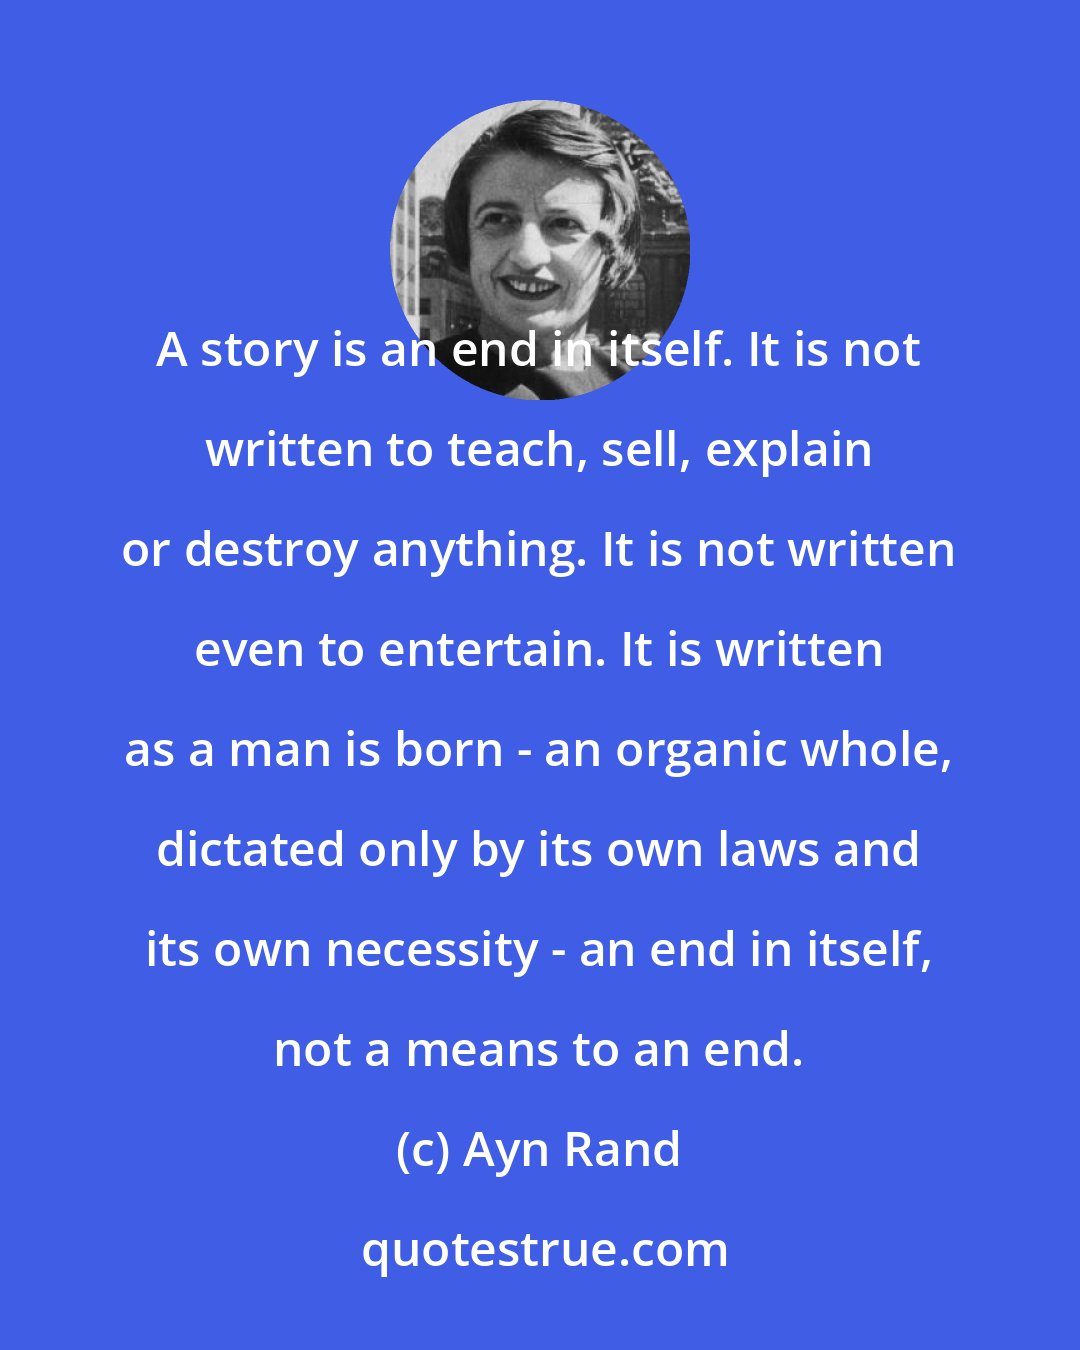 Ayn Rand: A story is an end in itself. It is not written to teach, sell, explain or destroy anything. It is not written even to entertain. It is written as a man is born - an organic whole, dictated only by its own laws and its own necessity - an end in itself, not a means to an end.